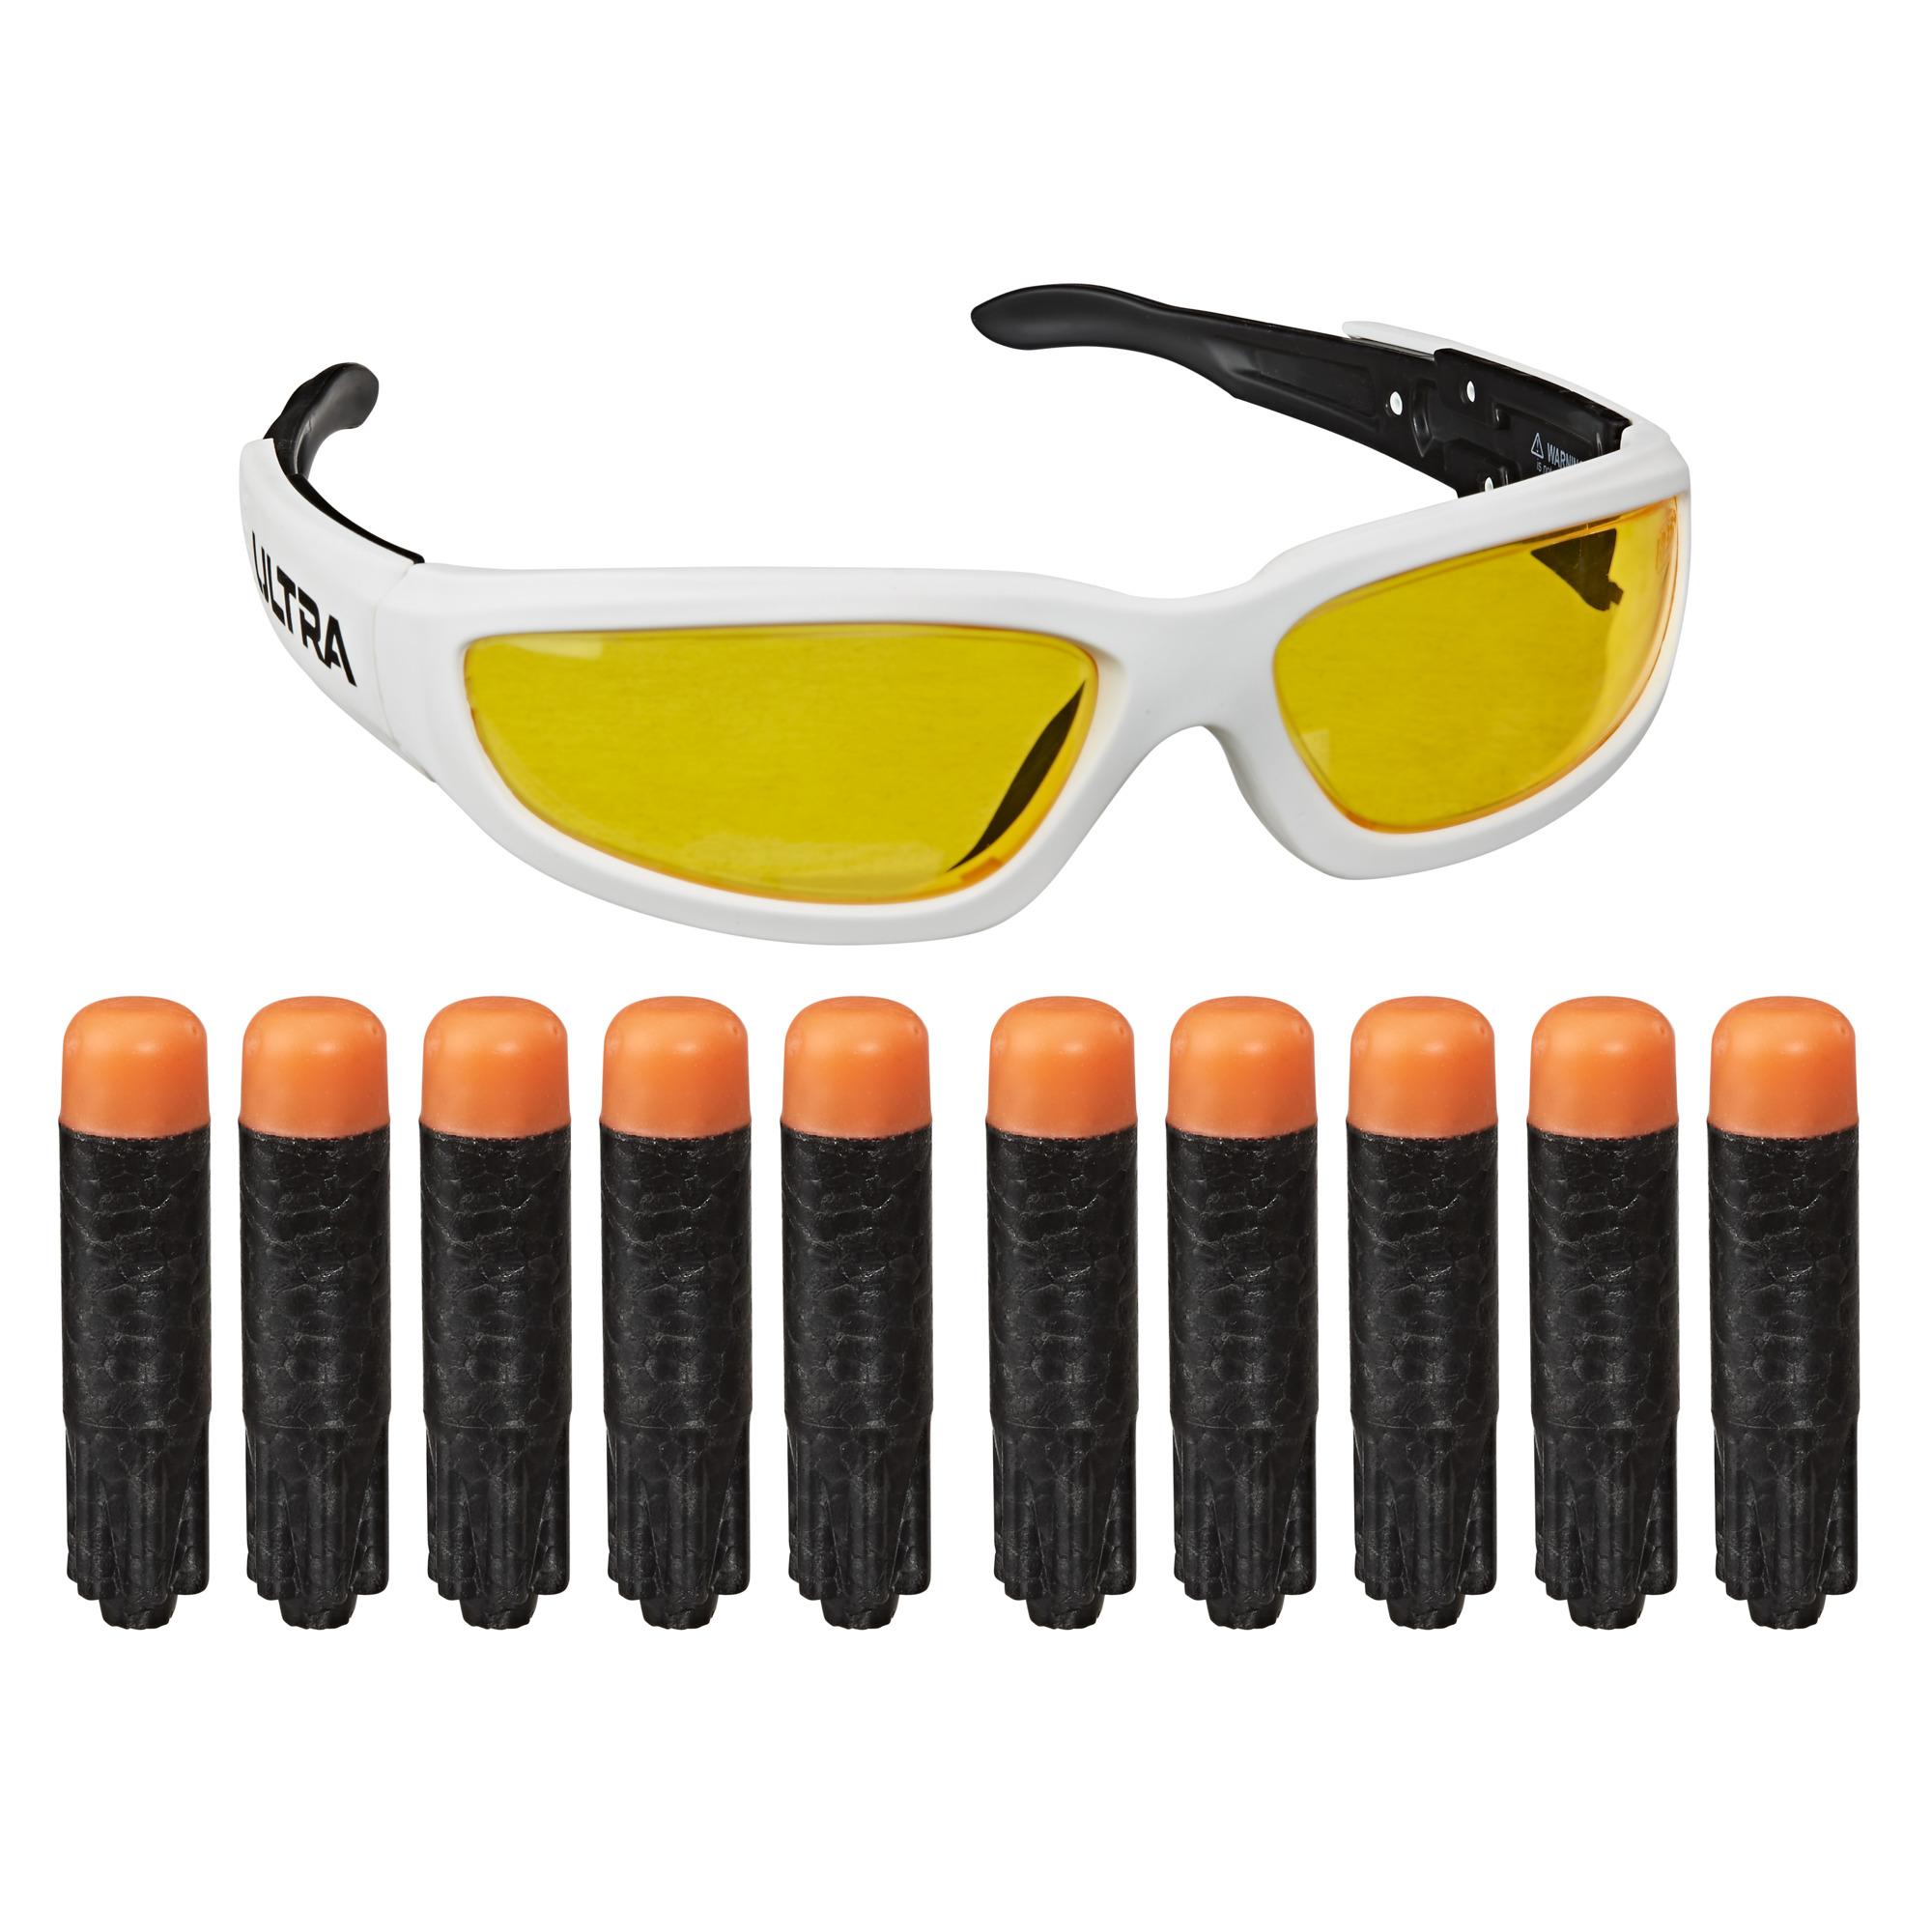 Nerf Ultra Vision Gear and 10 Nerf Ultra Darts -- Darts Compatible Only with Nerf Ultra Blasters